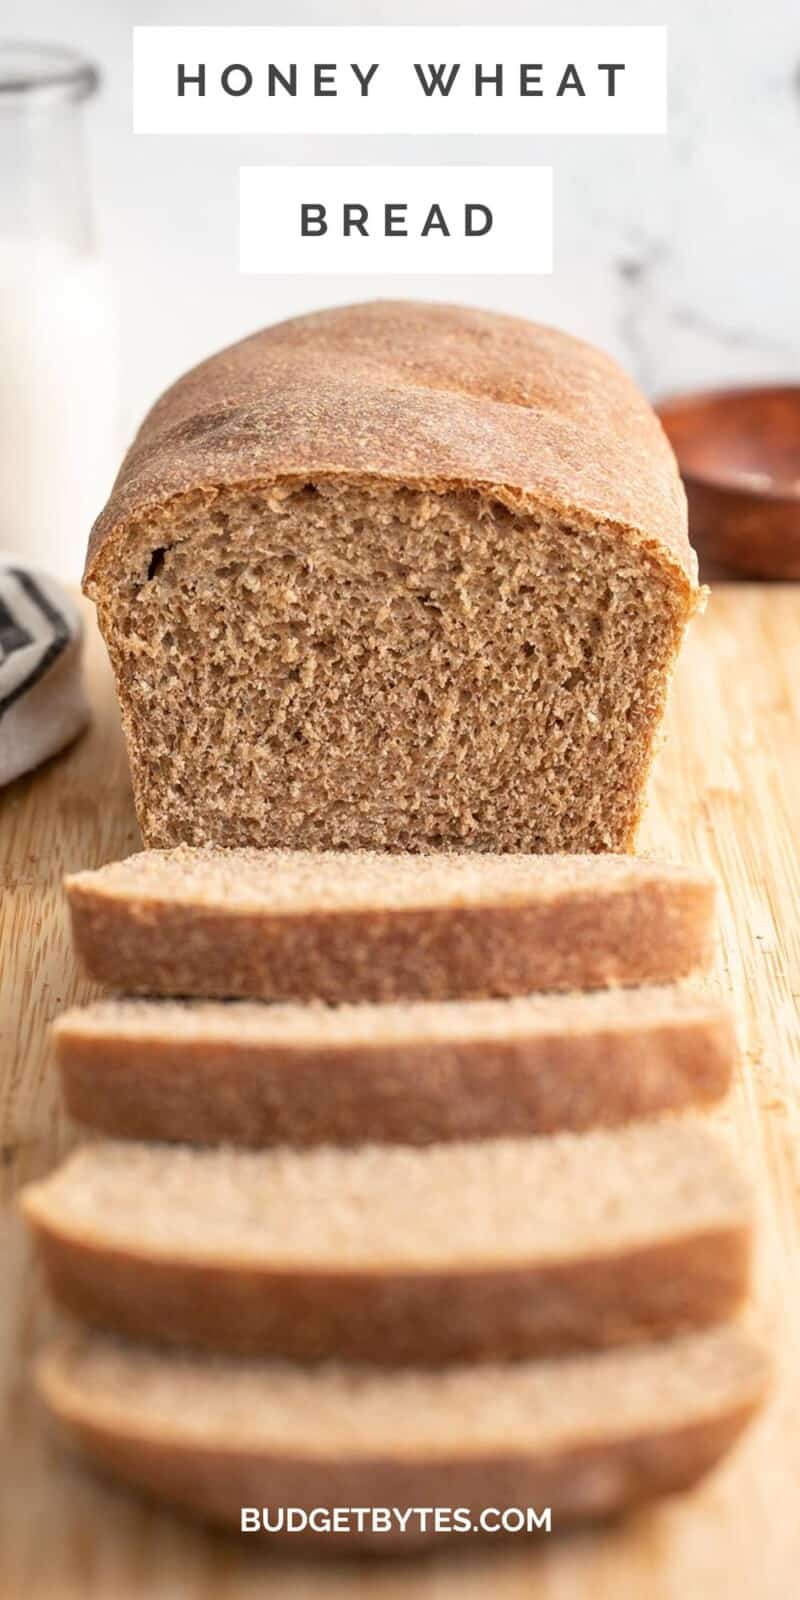 Front view of a loaf of sliced honey wheat bread.